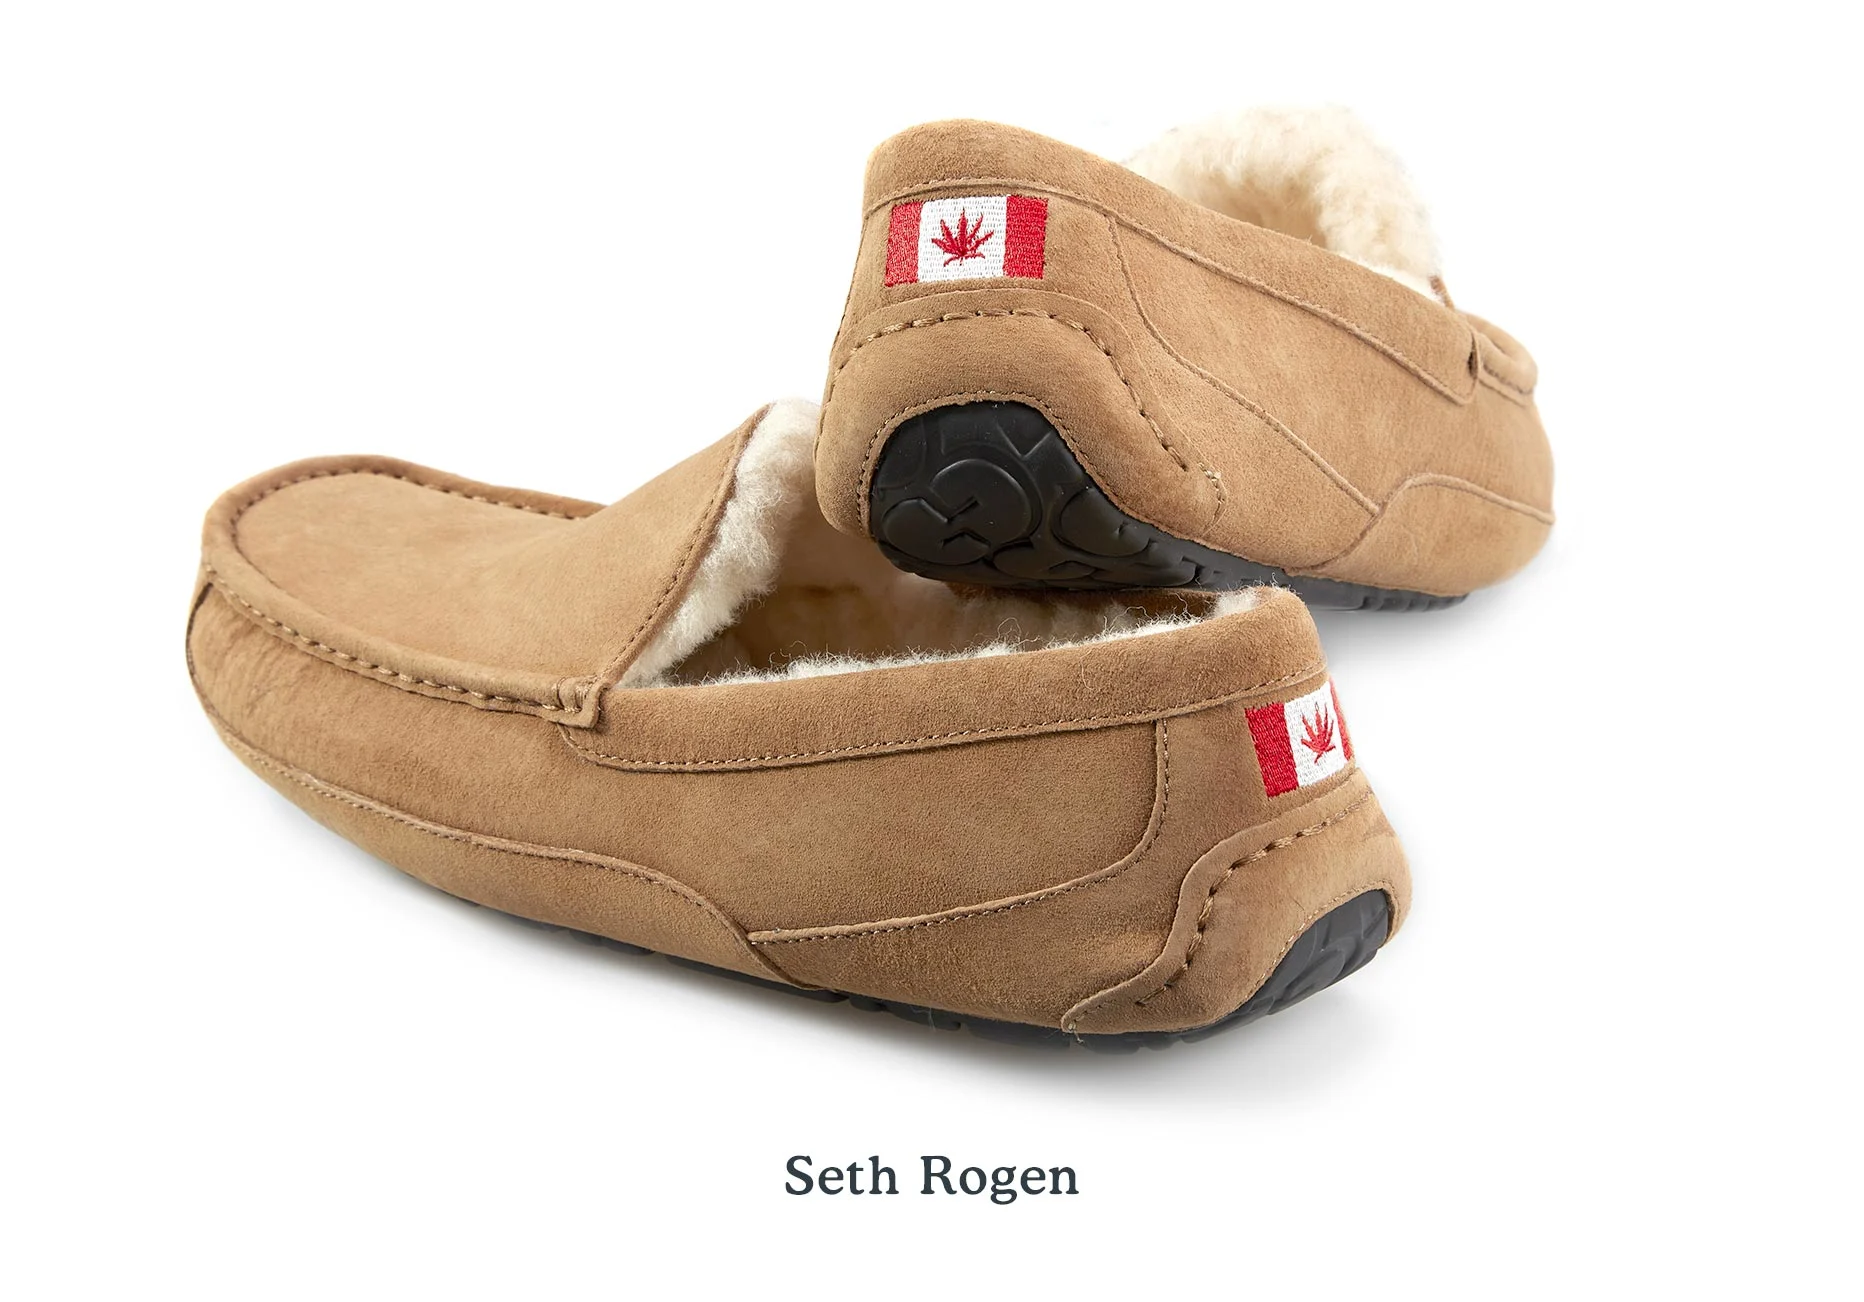 A pair of UGG Slippers for Seth Rogen with embroidery of a Canadian flag on the heel